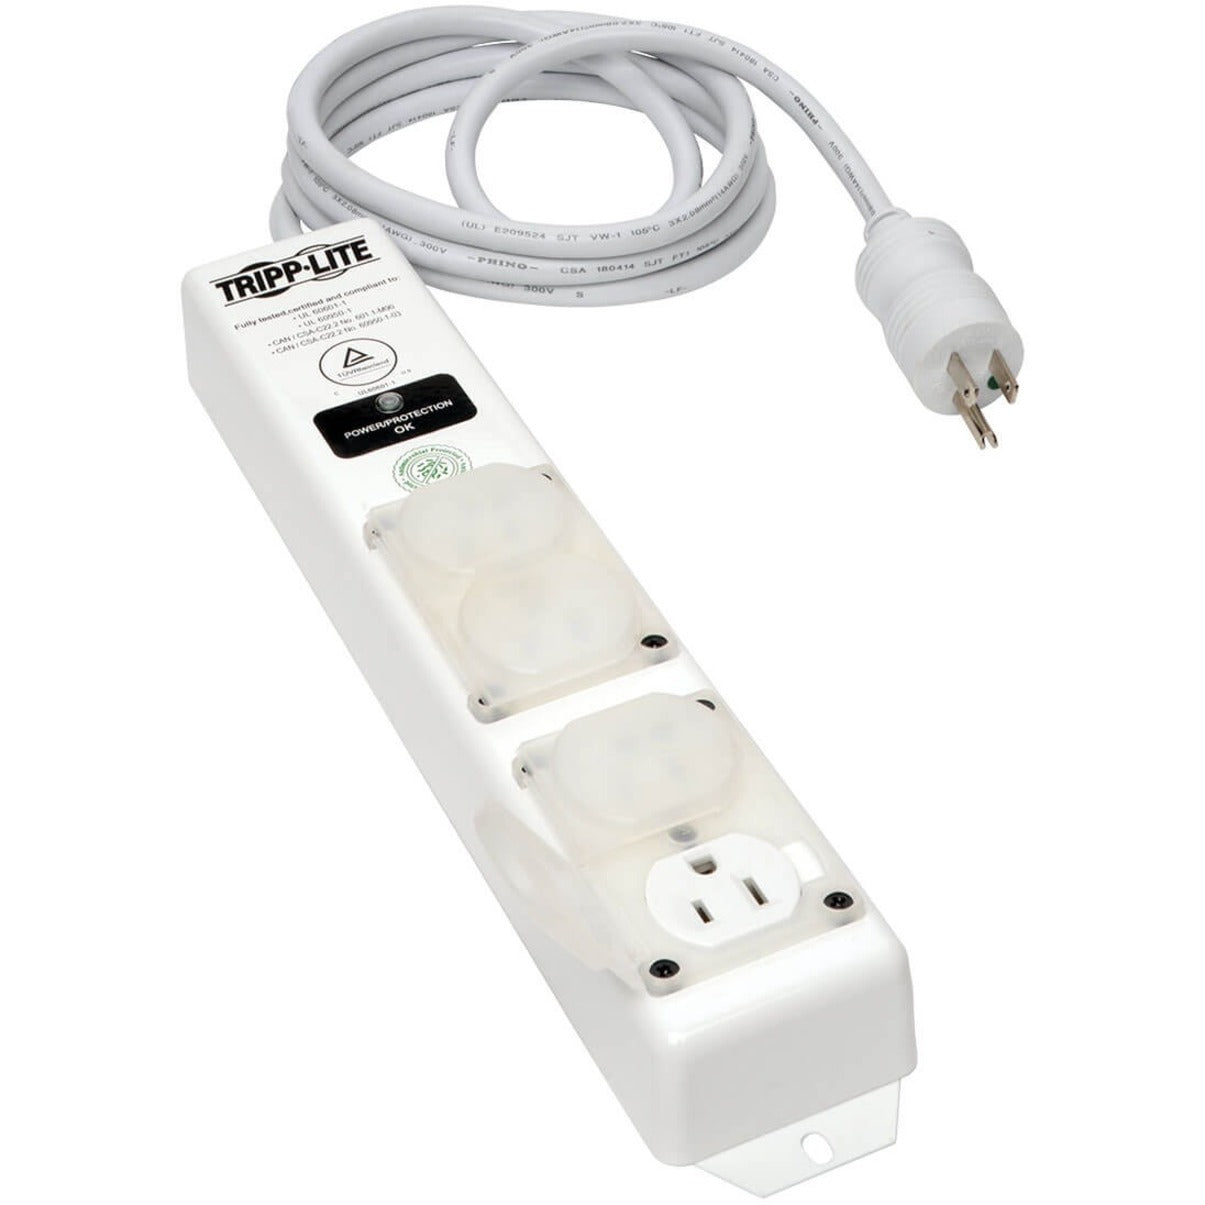 Tripp Lite SPS415HGULTRA Surge Suppressor, 4-Outlets Hospital Grade, Approved for use in Patient-Care Areas, Rugged all-metal housing